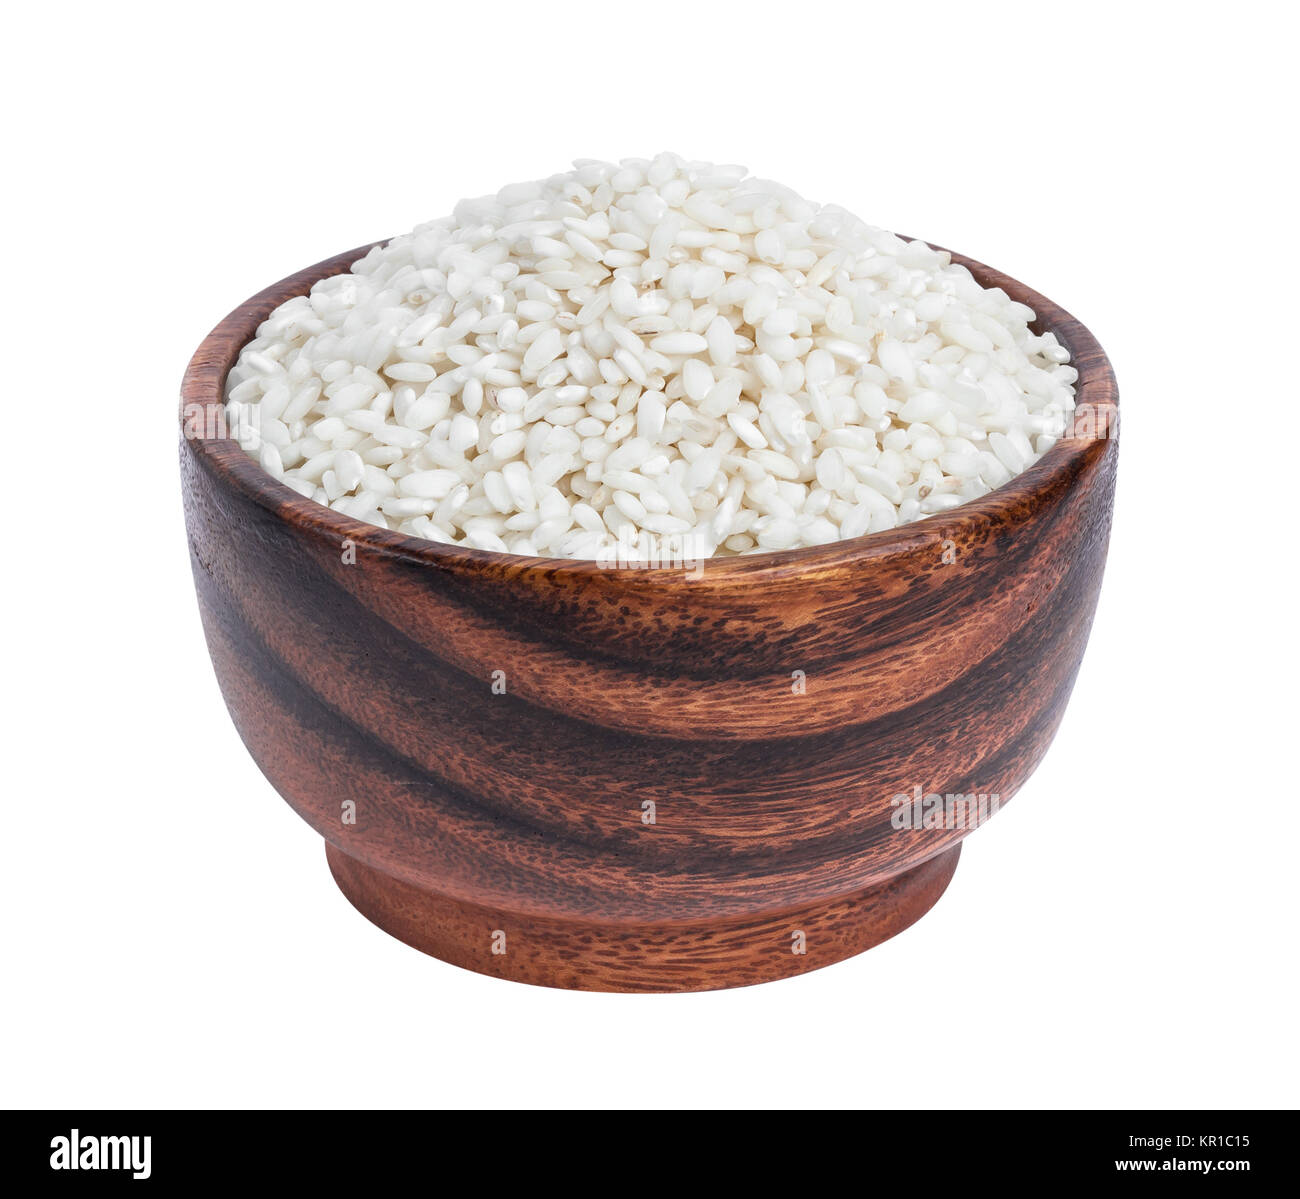 Risotto rice in wooden bowl isolated on white background Stock Photo